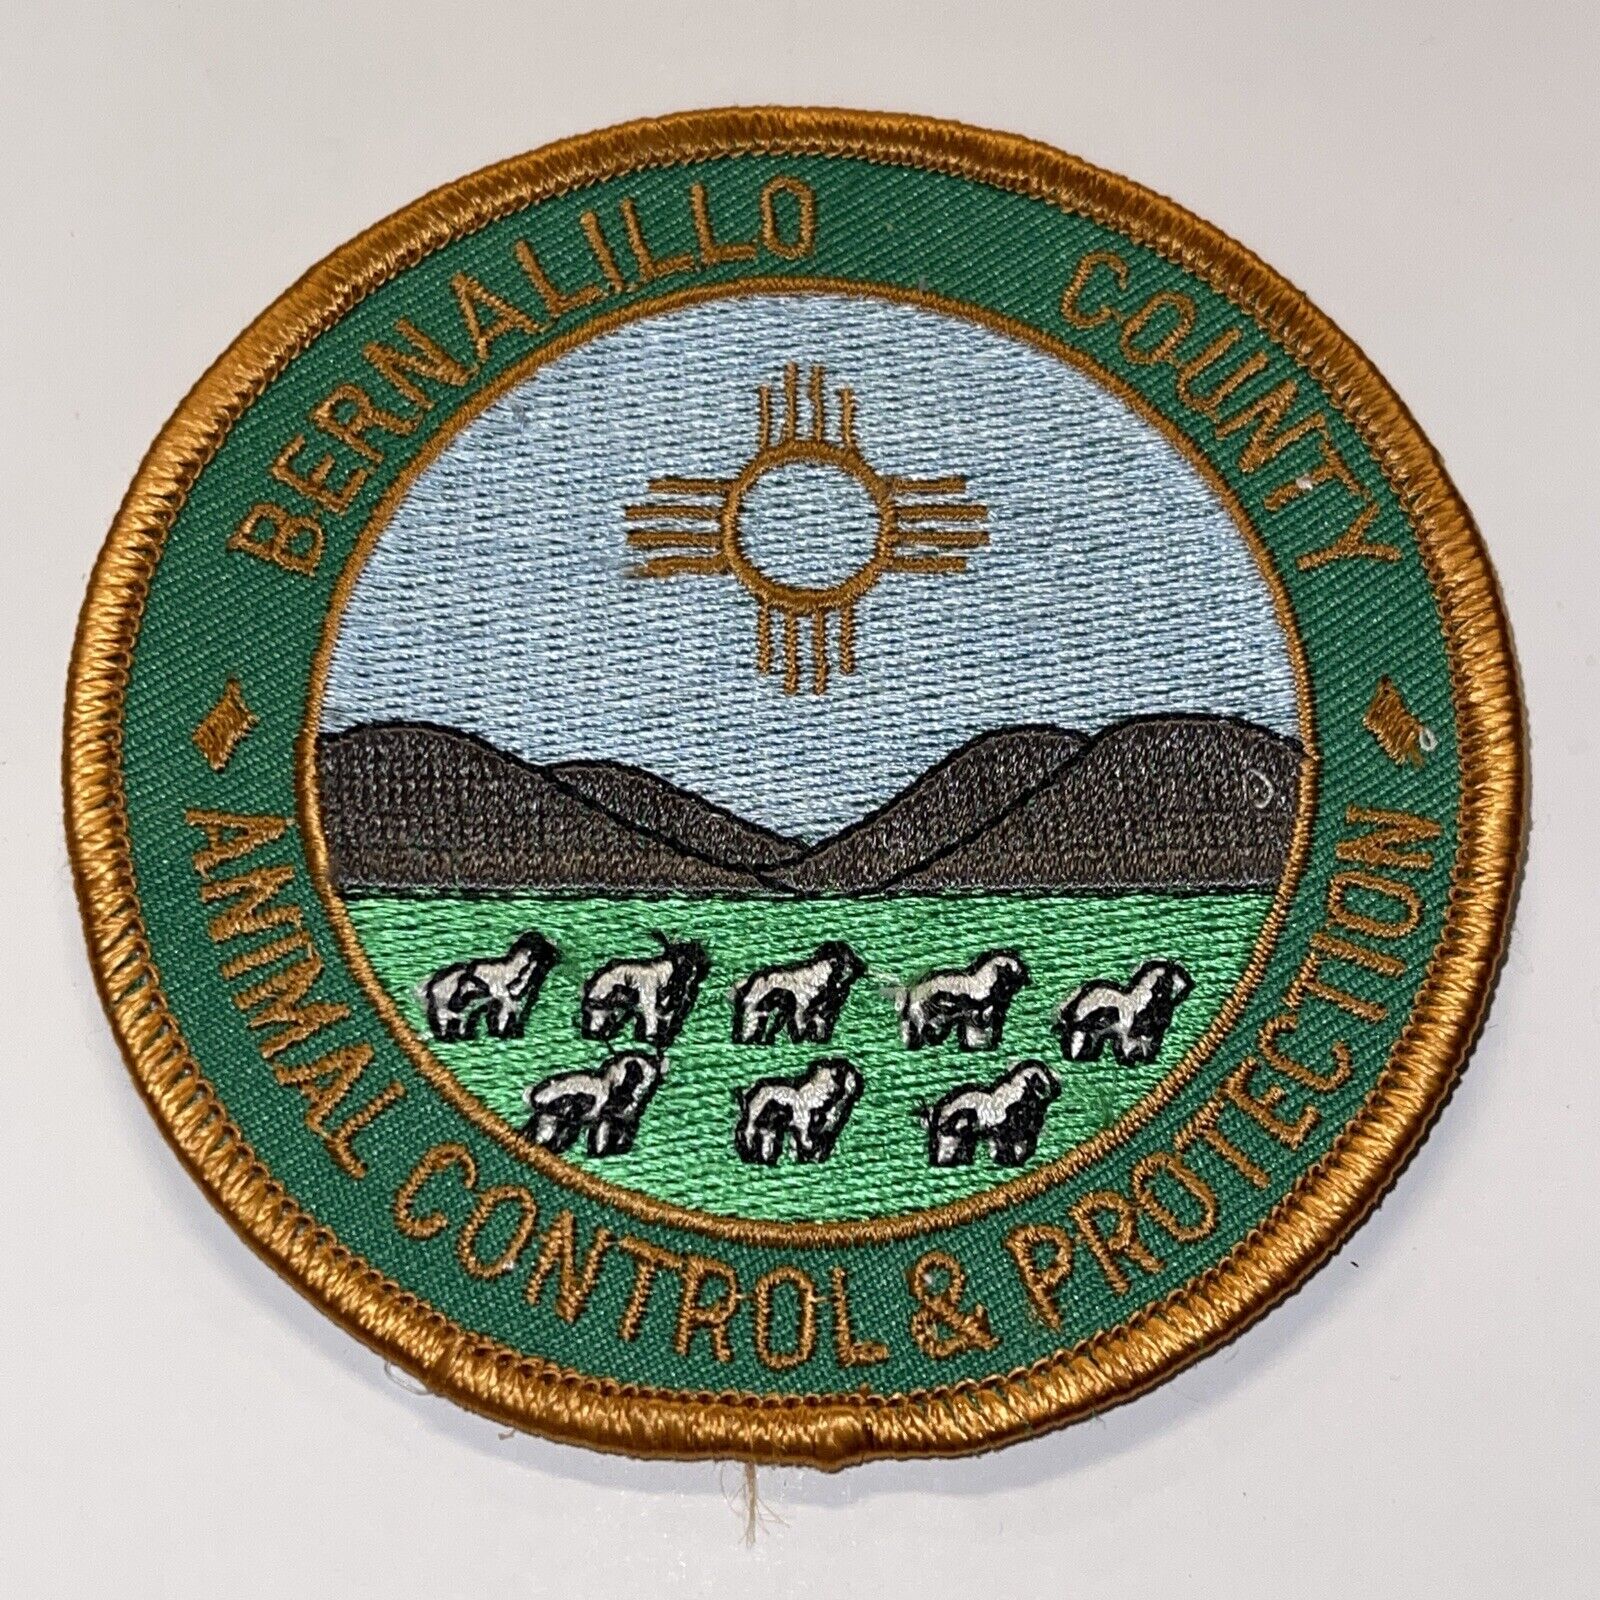 OLD OBSOLETE BERNALILLO COUNTY NEW MEXICO SHERIFF PATCH SHOULDER ANIMAL CONTROL